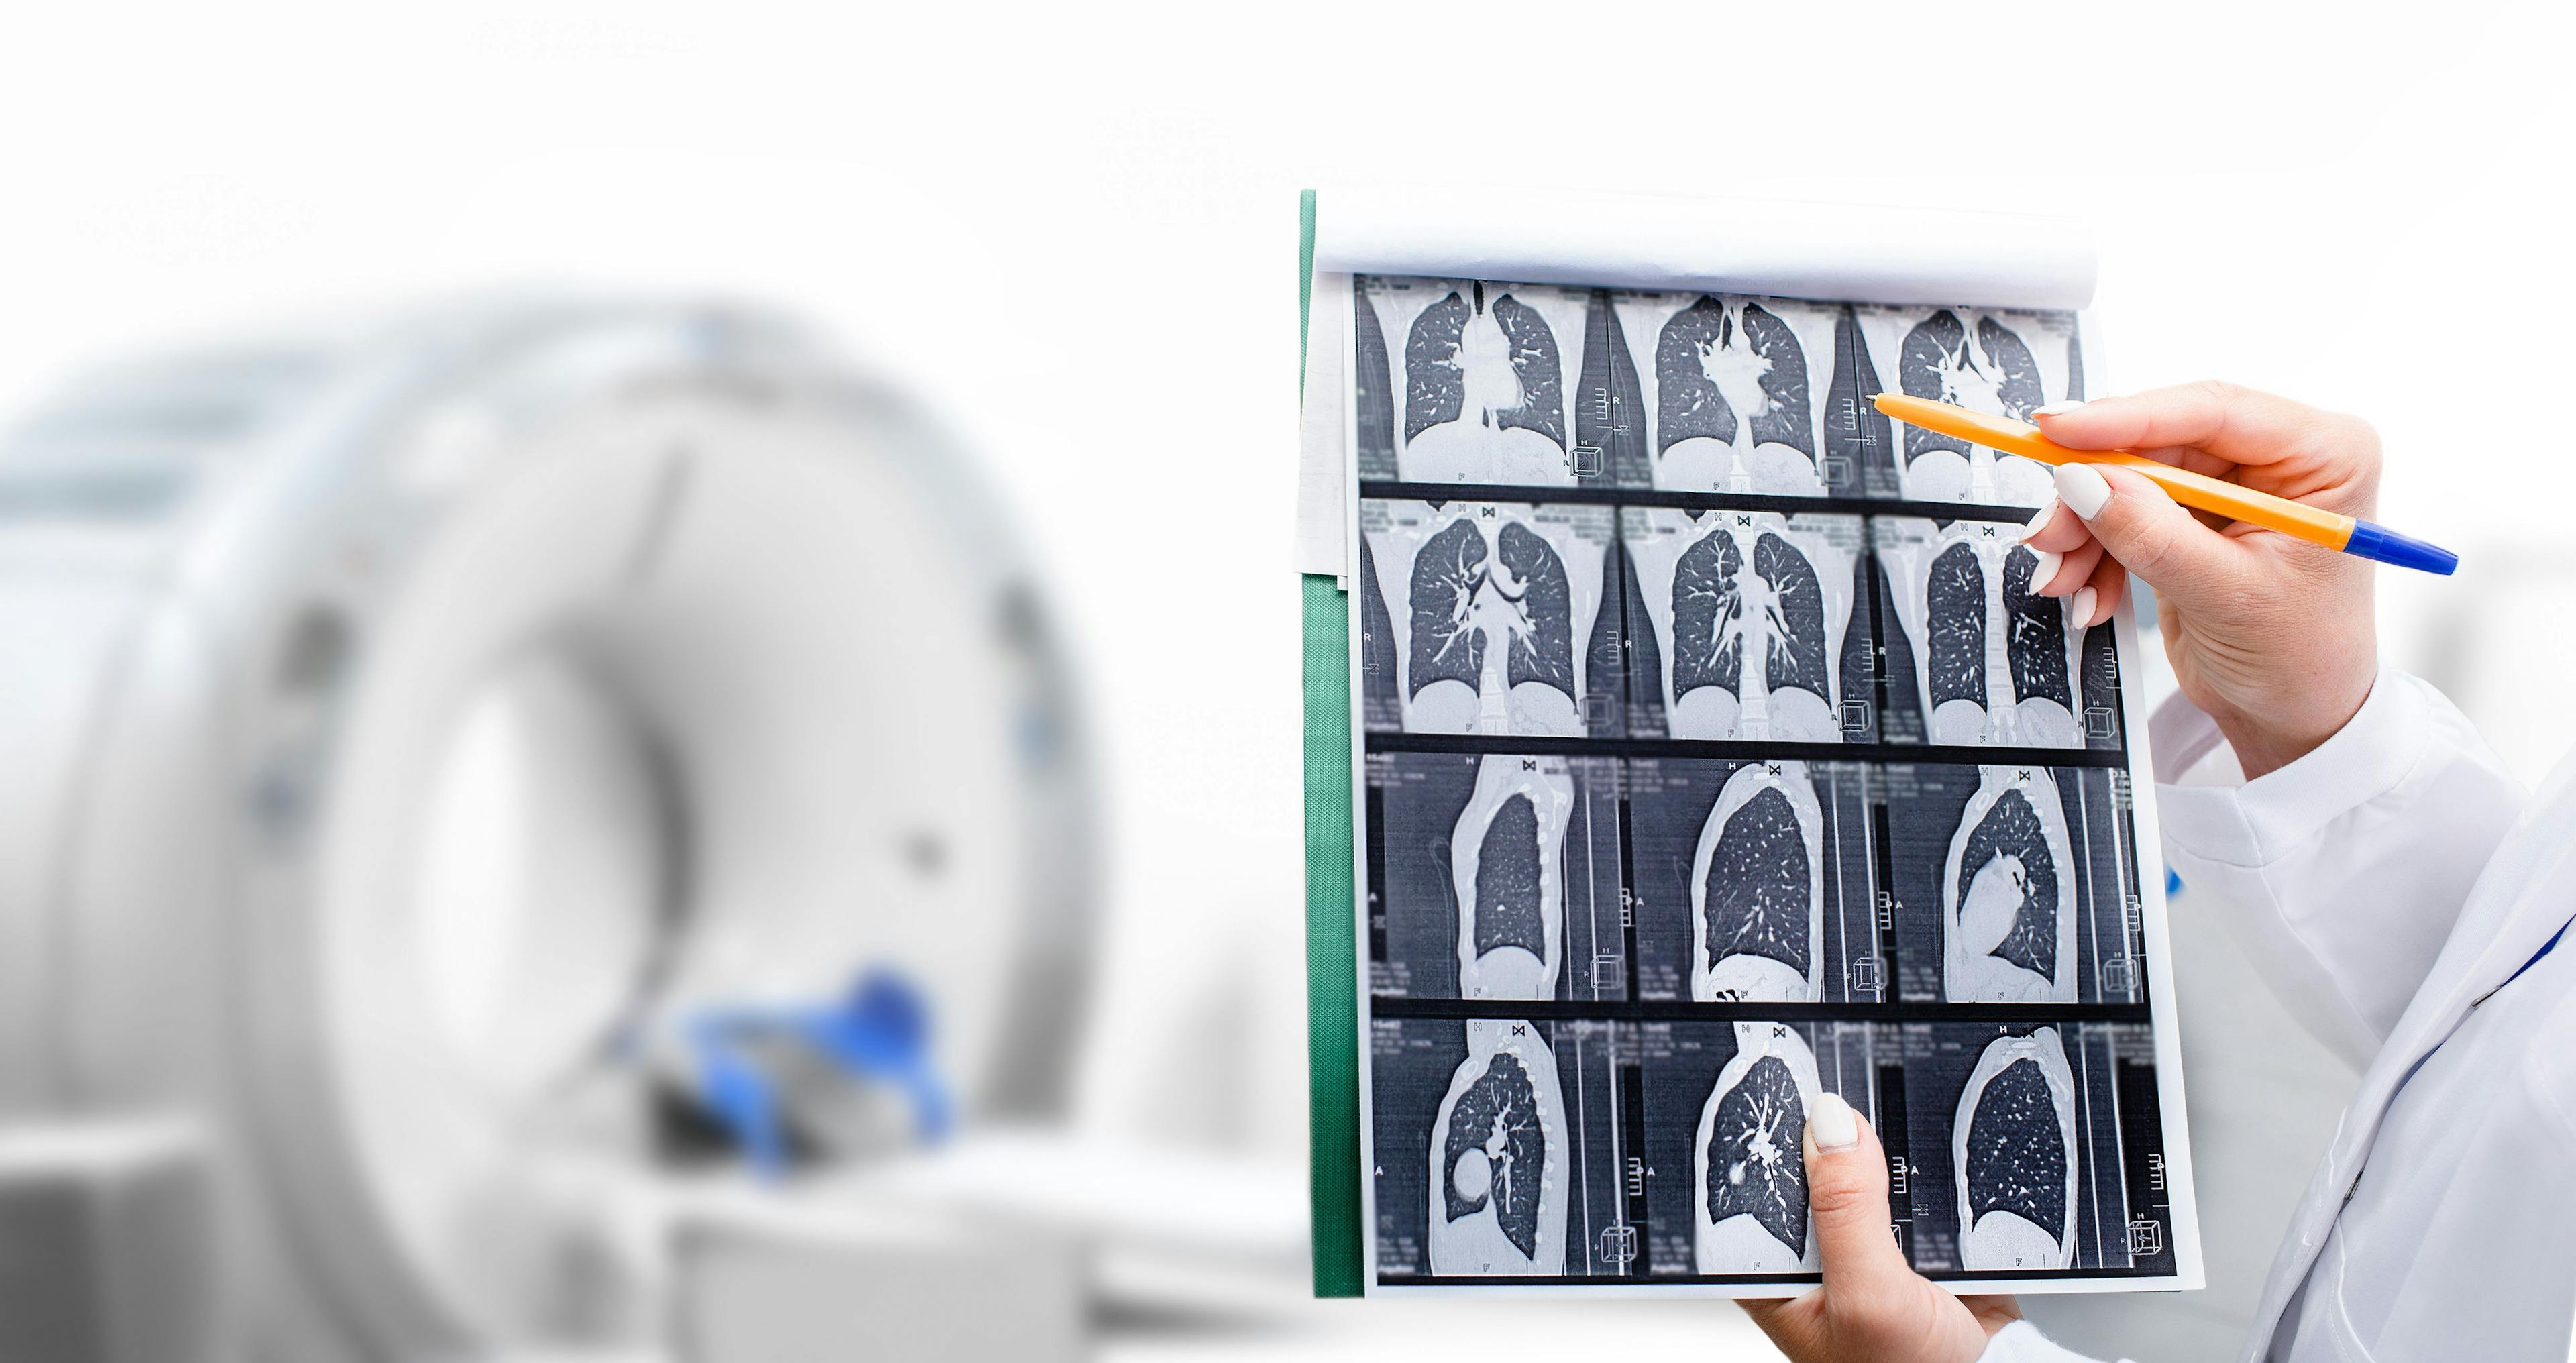 Radiologist showing tomography scan of a patient's lungs over of CT machine. Treatment of lung diseases, pneumonia, coronavirus, covid, cancer, tuberculosis | Image credit: © Peakstock - stock.adobe.com.